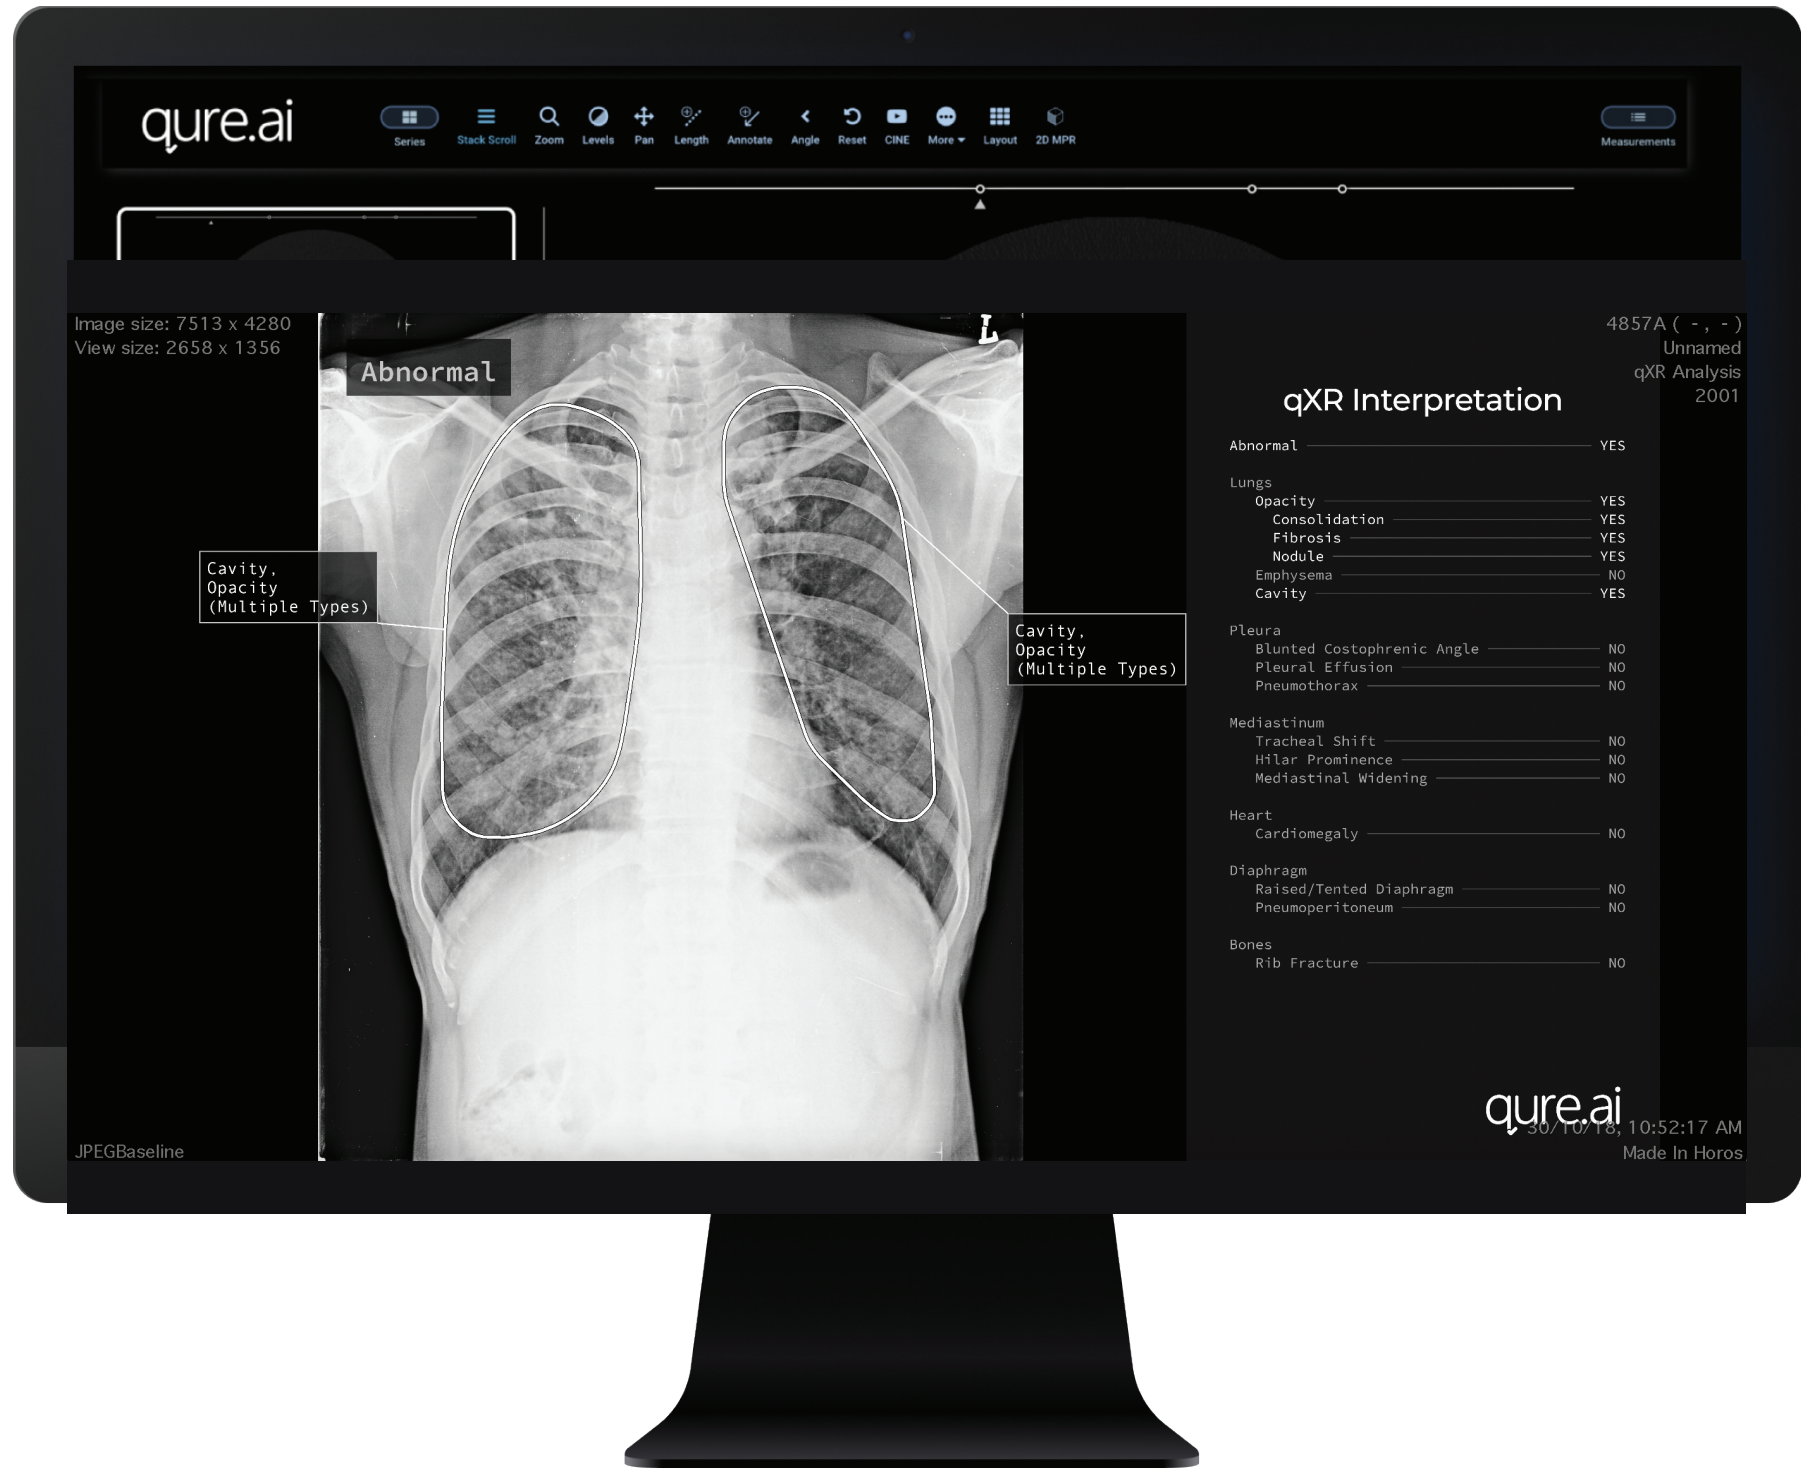 Qure.ai's CE-certified chest X-ray solution, qXR, will help identify which cases are clear of clinically relevant findings, allowing radiologists to detect them even before they open the case.